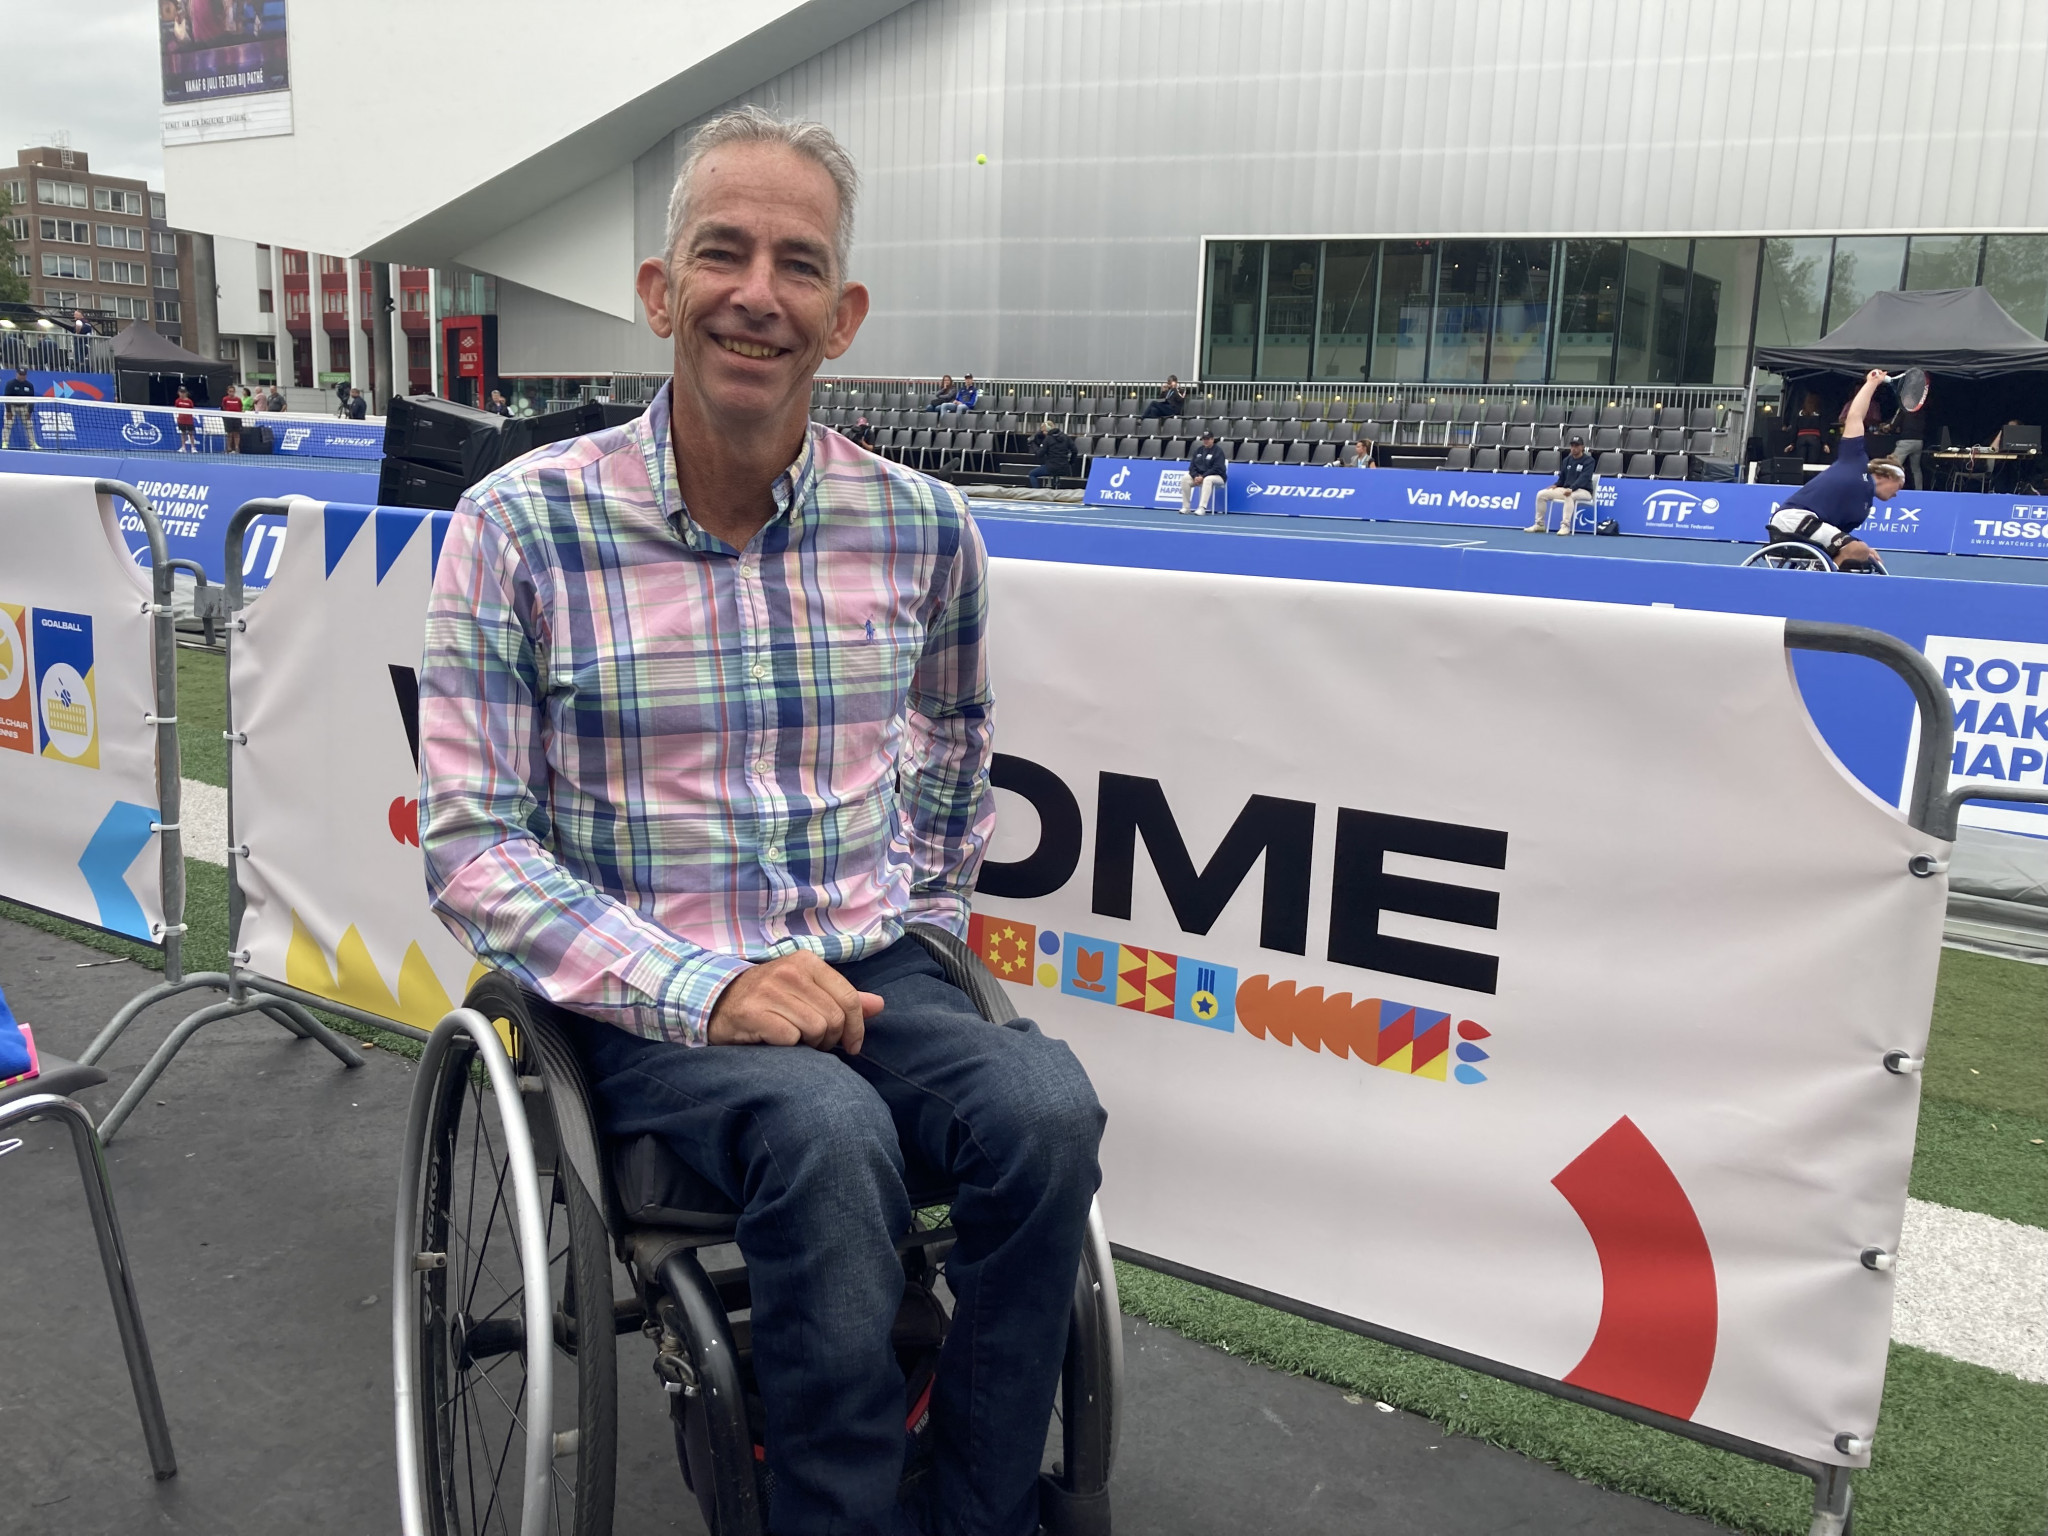 Athens 2004 gold medallist Robin Ammerlaan said Dutch success had largely been down to the work of the country's governing body to integrate wheelchair tennis ©ITG